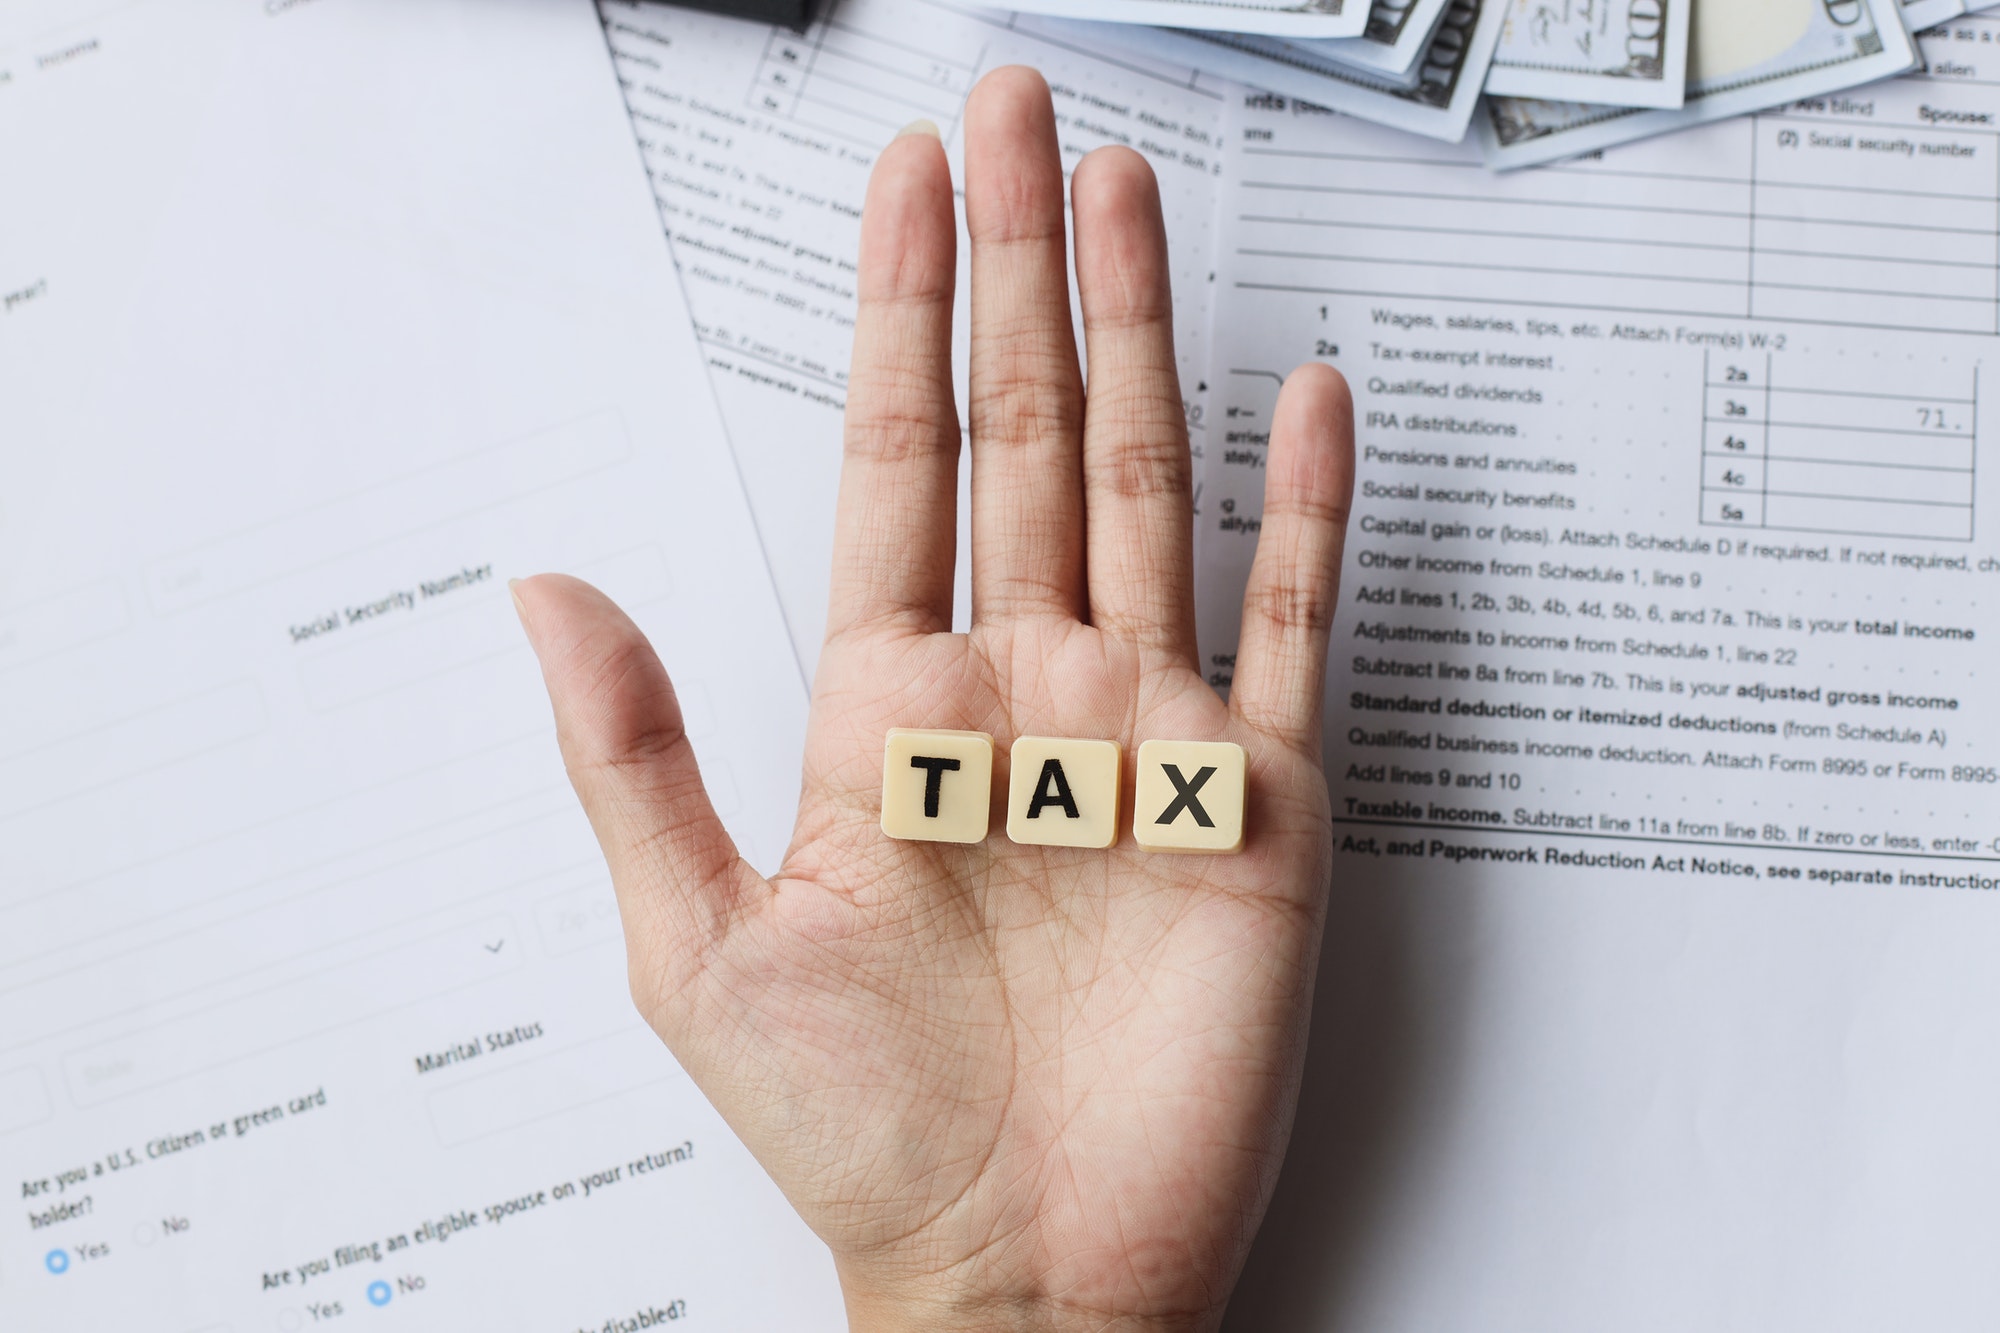 TAX words on palm hands against the tax forms.